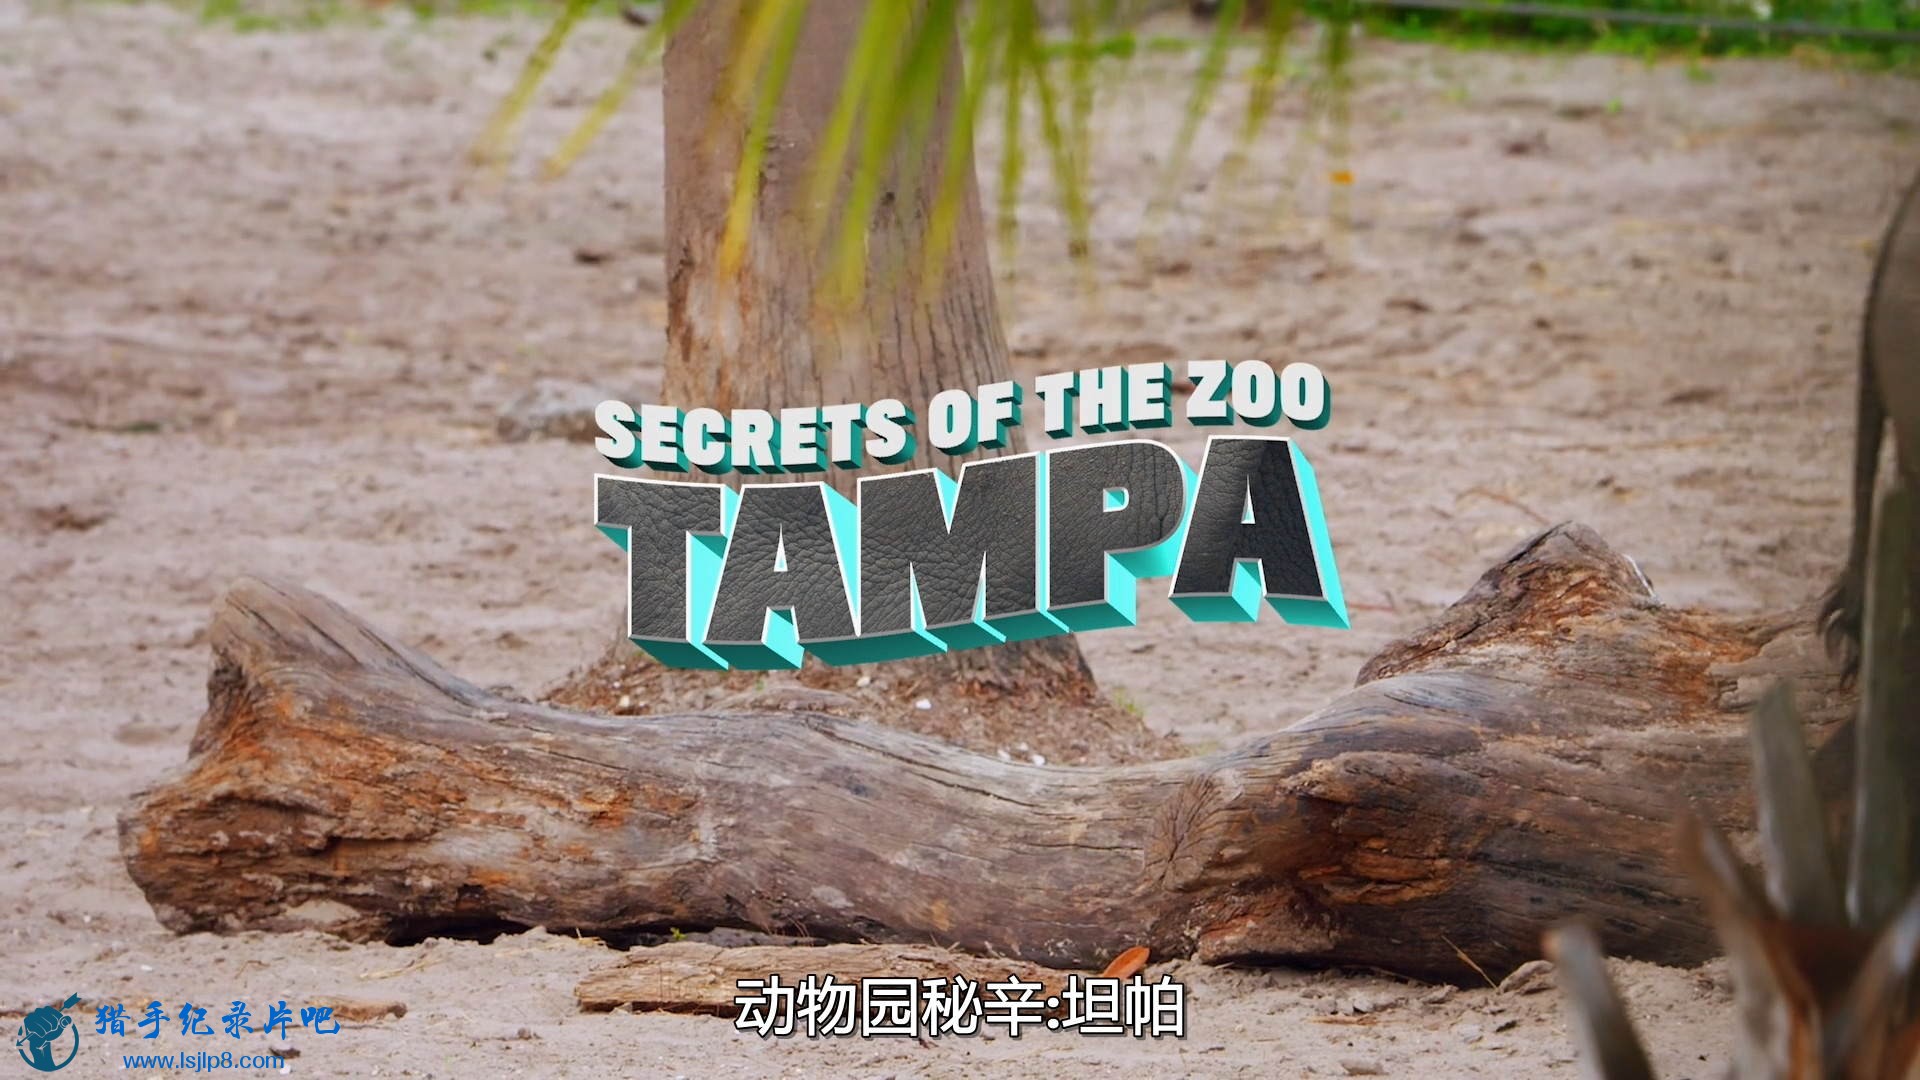 Secrets.Of.The.Zoo.Tampa.S02E01.1080p.DSNP.WEB-DL.DD5.1.H.264-NTb.jpg